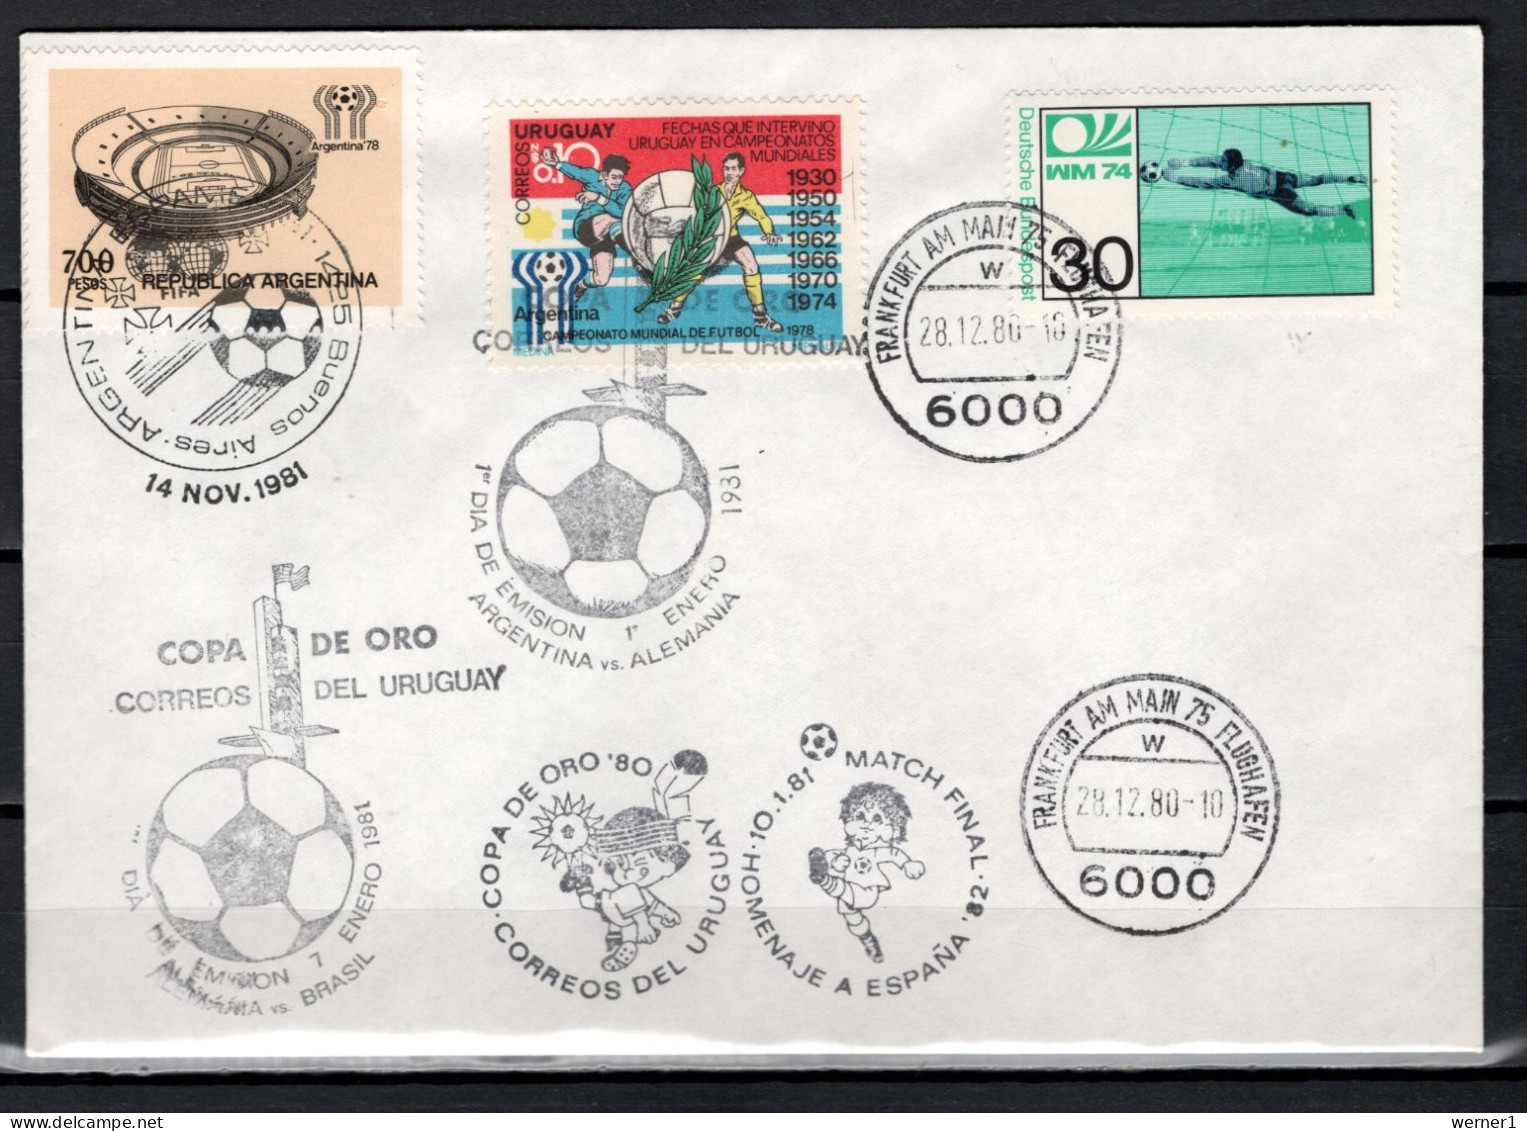 Argentina / Uruguay / Germany 1980/1981 Football Soccer World Cup Commemorative Cover - 1978 – Argentine